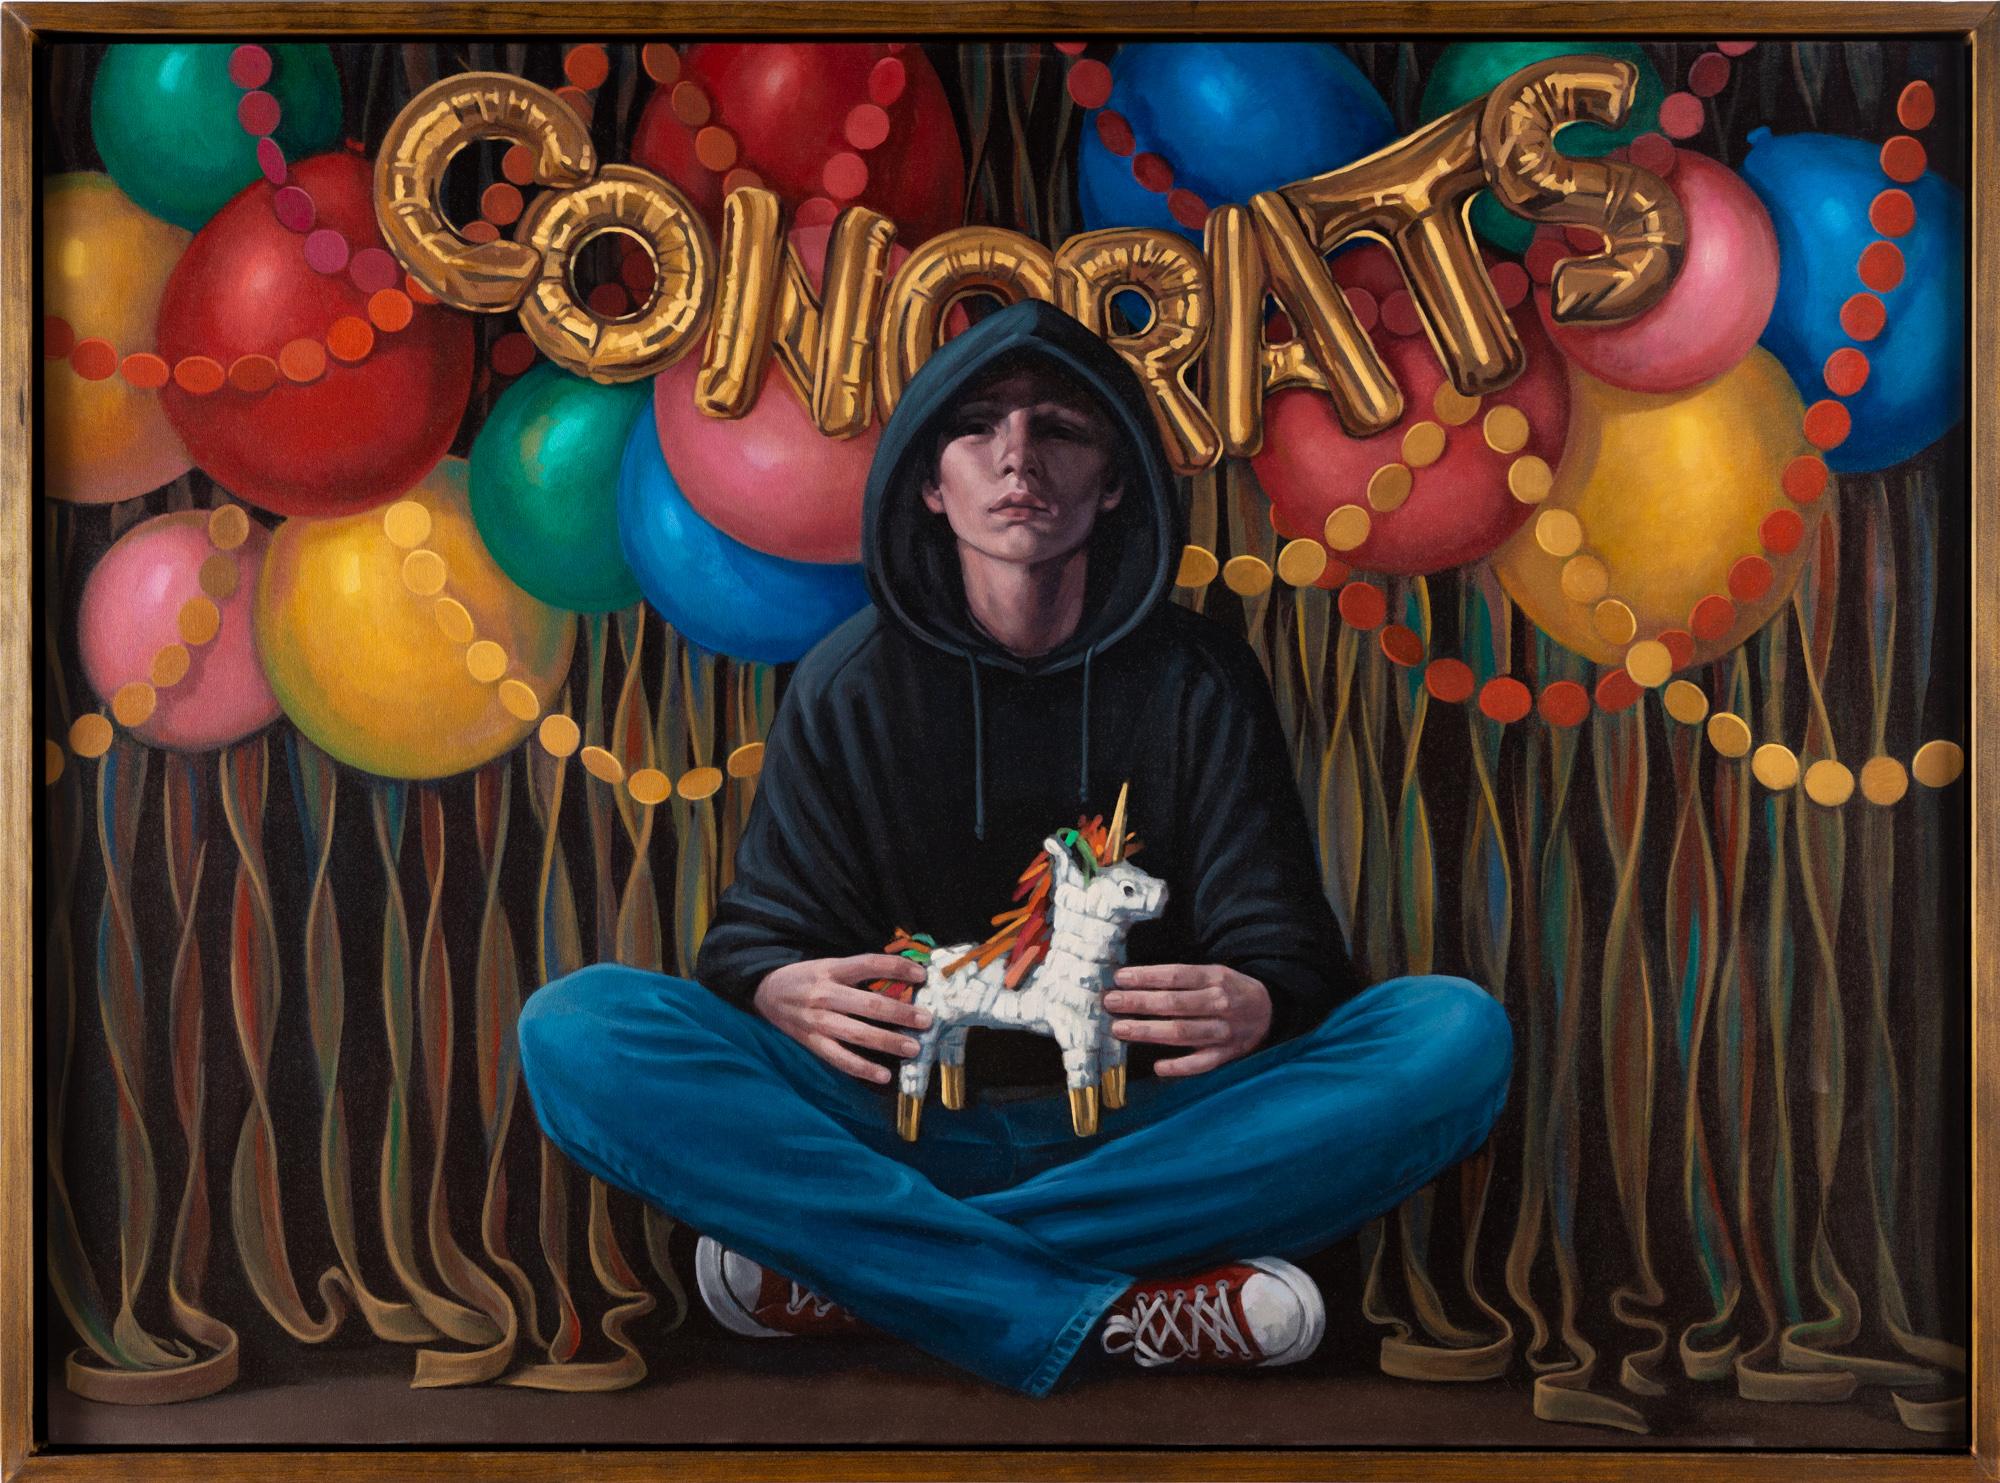 Katherine Fraser Portrait Painting - "The Results Are In" Oil on canvas, seated figure, balloons, unicorns, favors